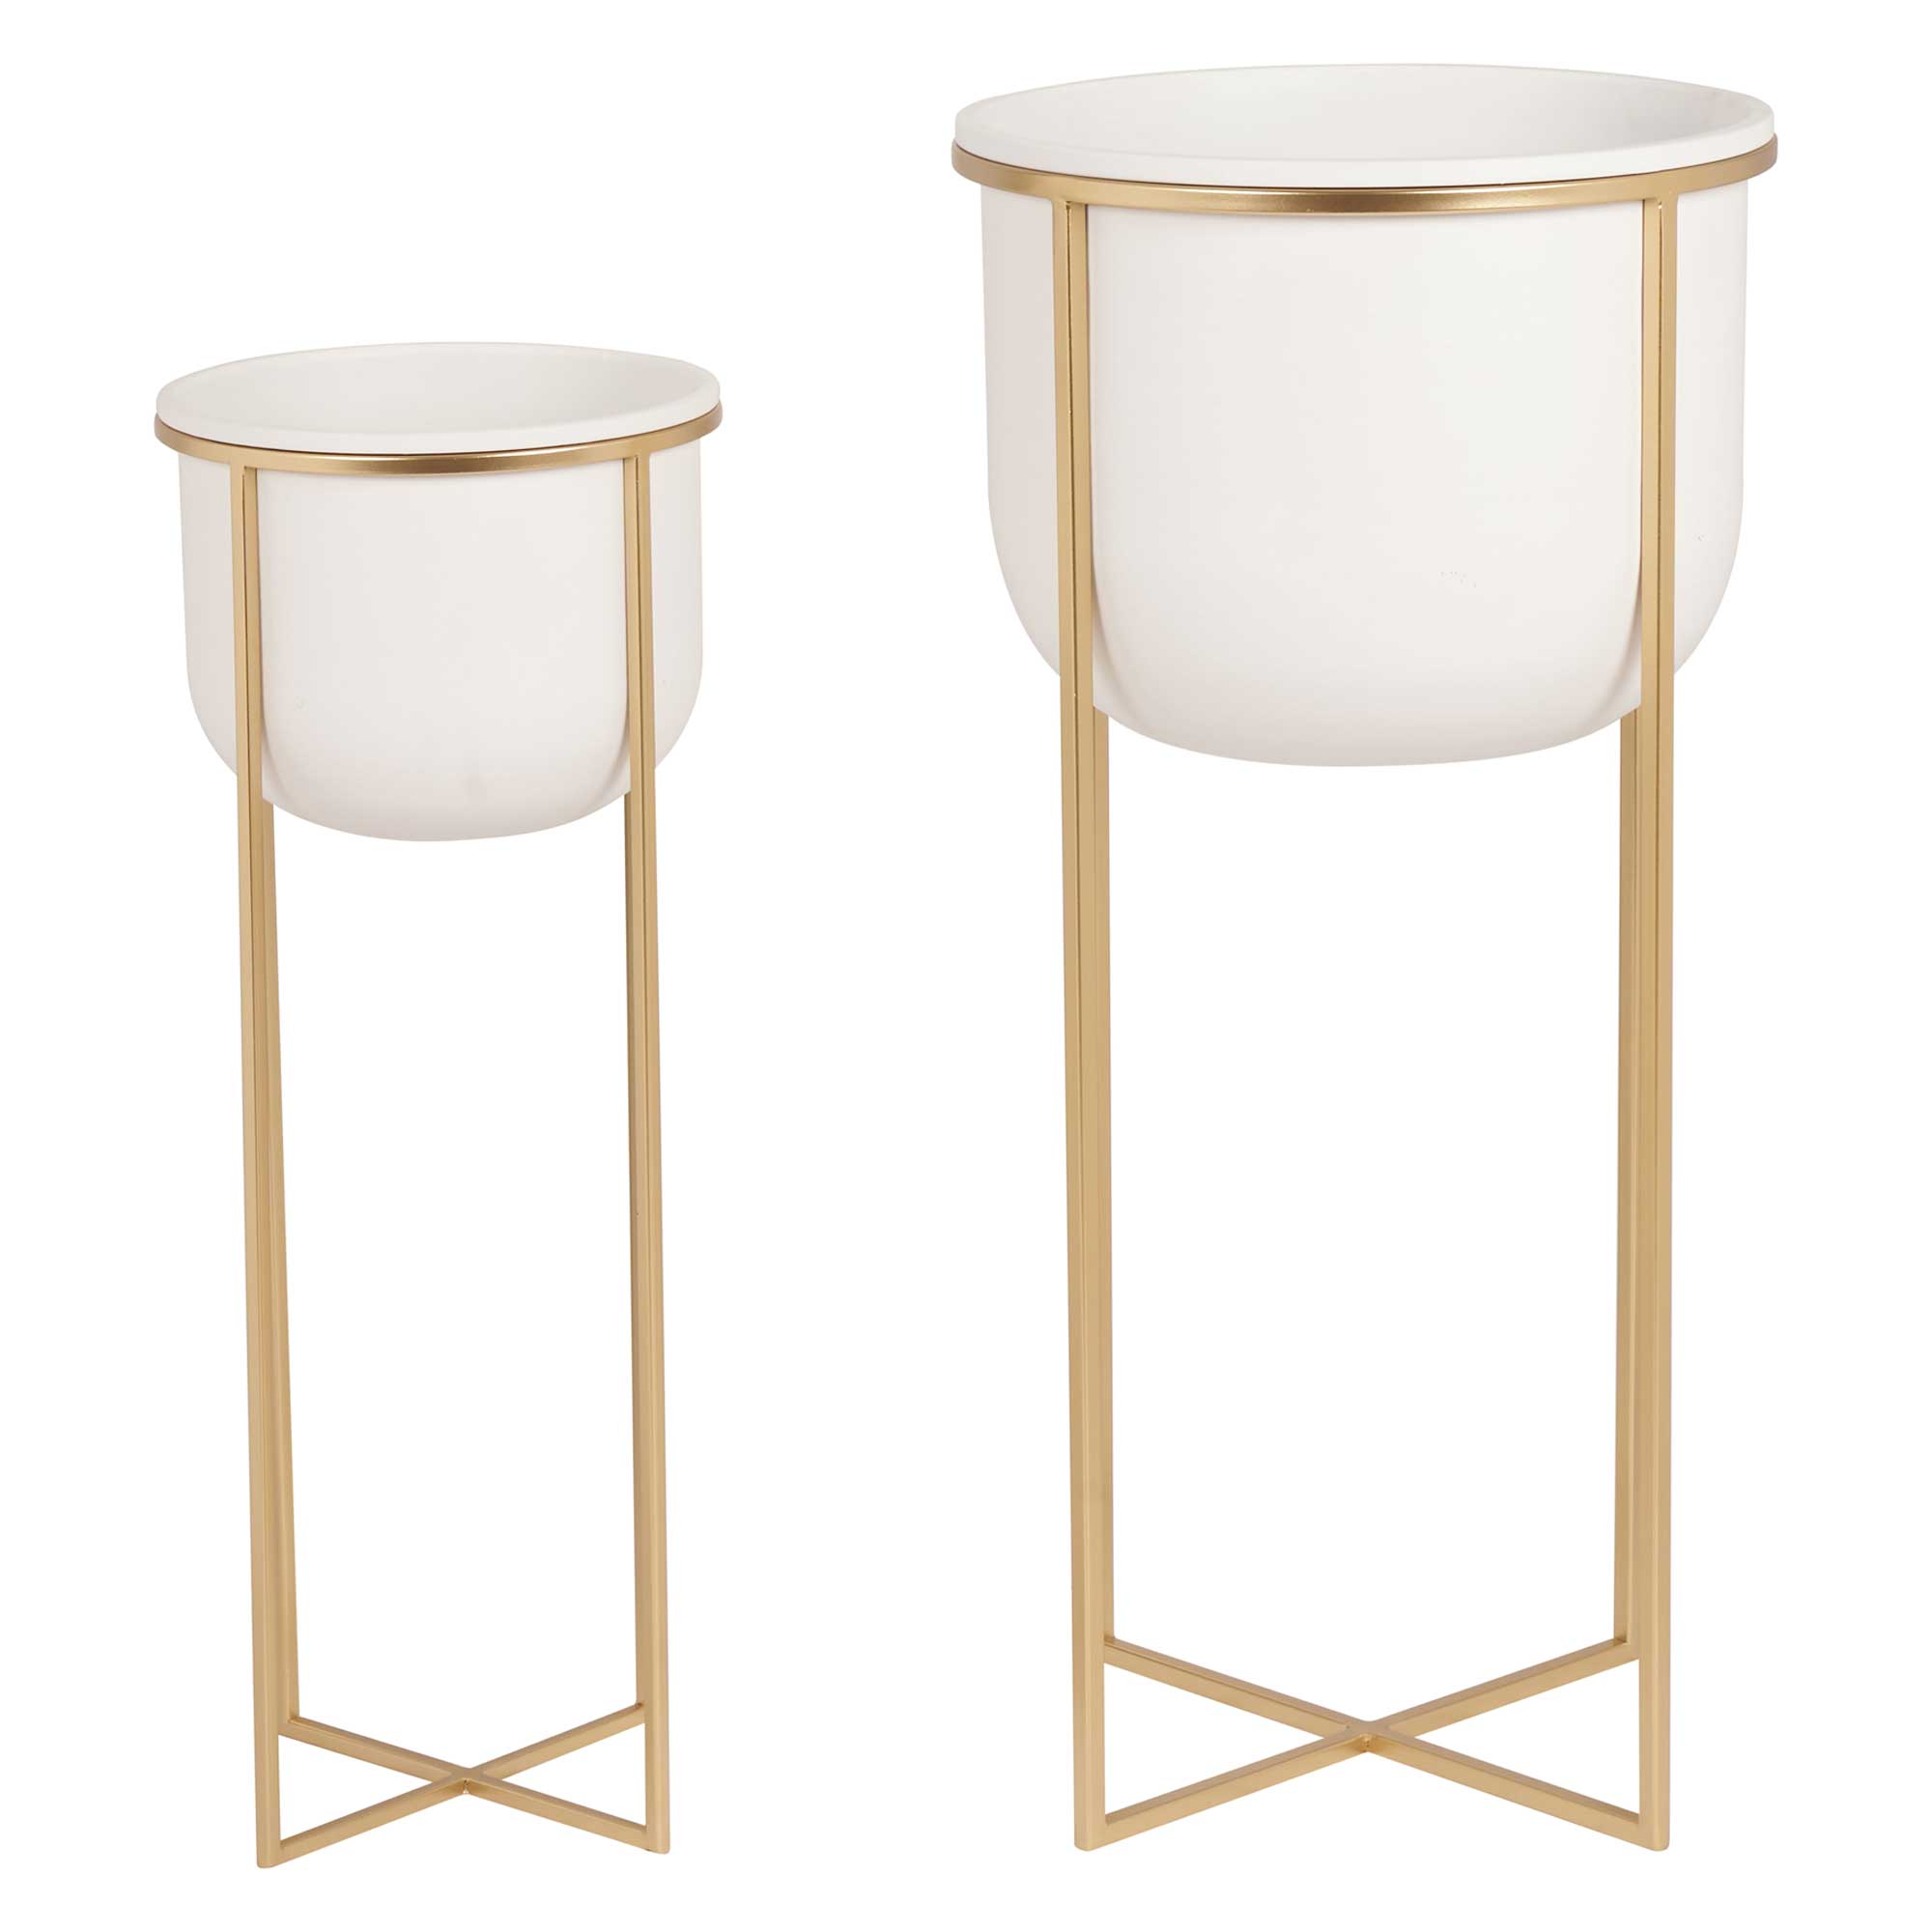 S/2 White & Gold Metal Planters | Barker & Stonehouse